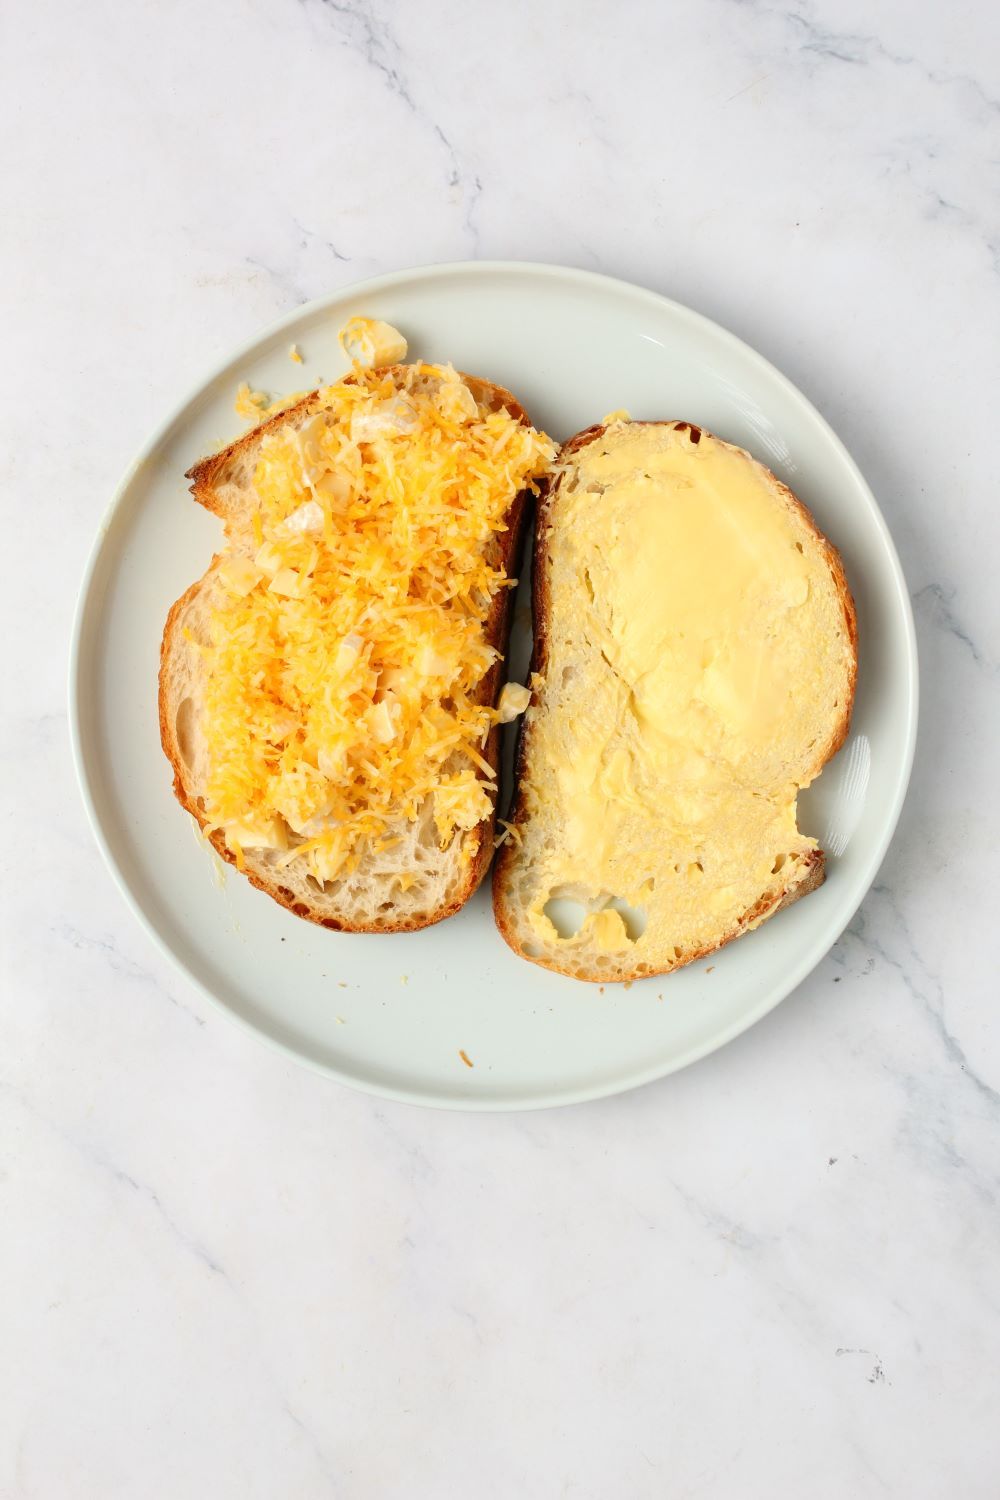 Half the cheese mixture on unbuttered sourdough toast.